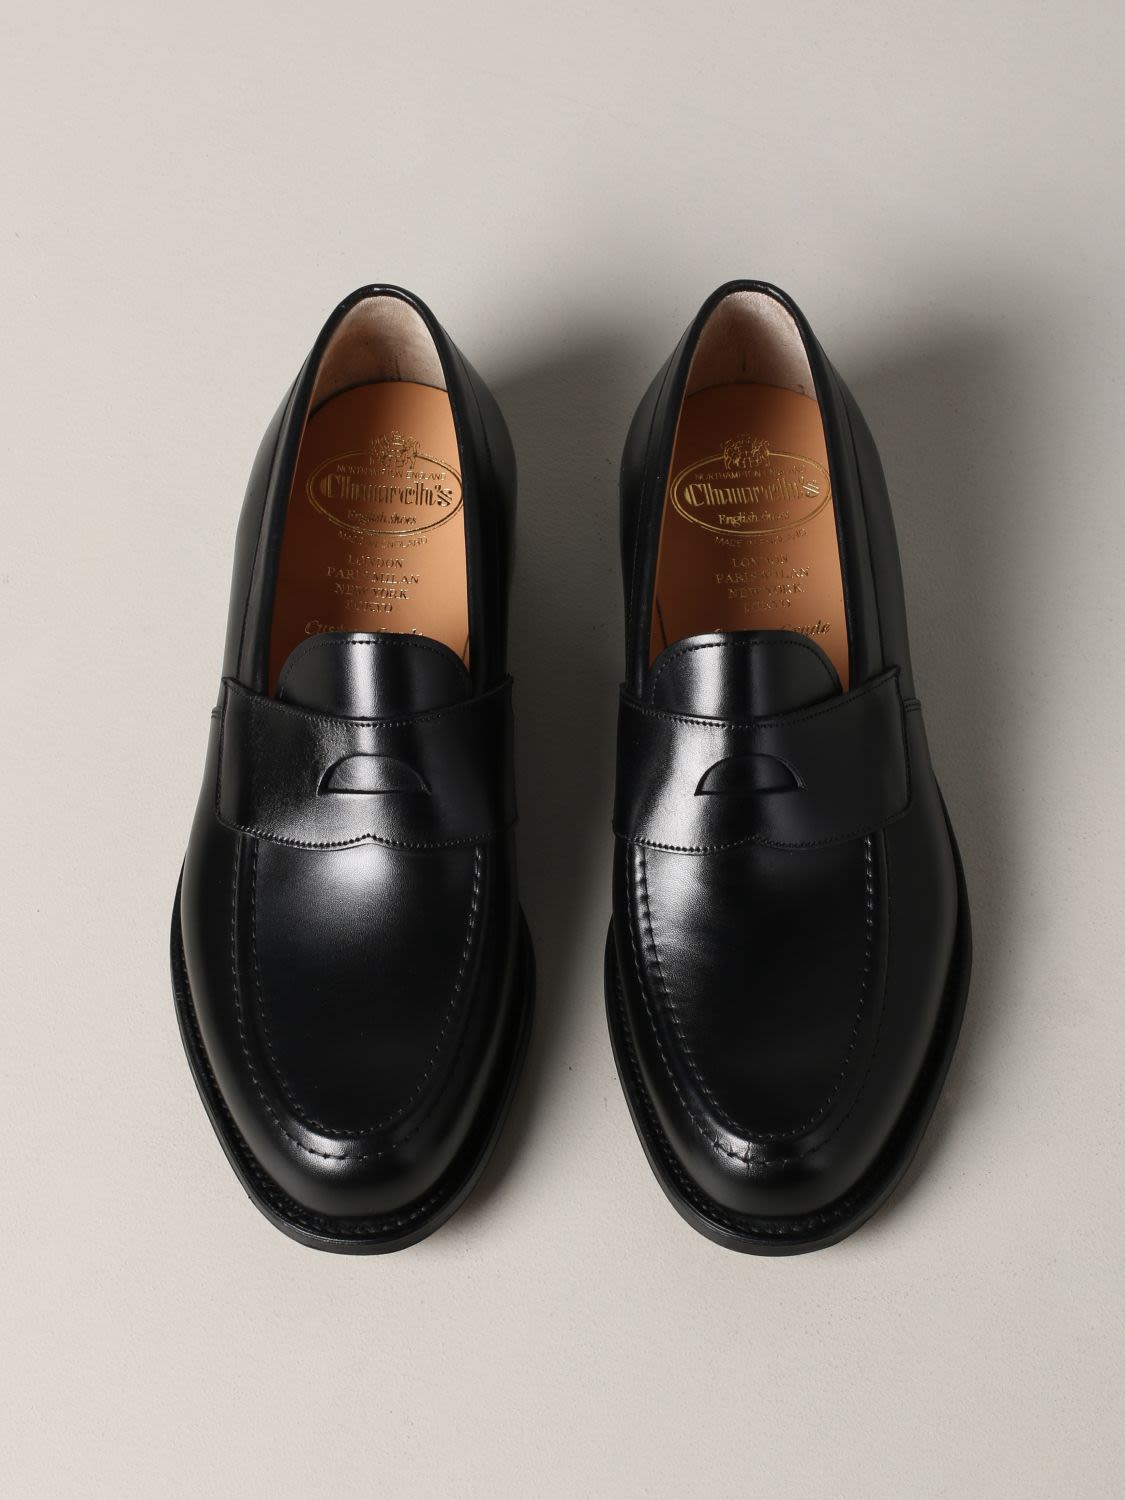 Church's Loafers & Boat Shoes | italist, ALWAYS LIKE A SALE